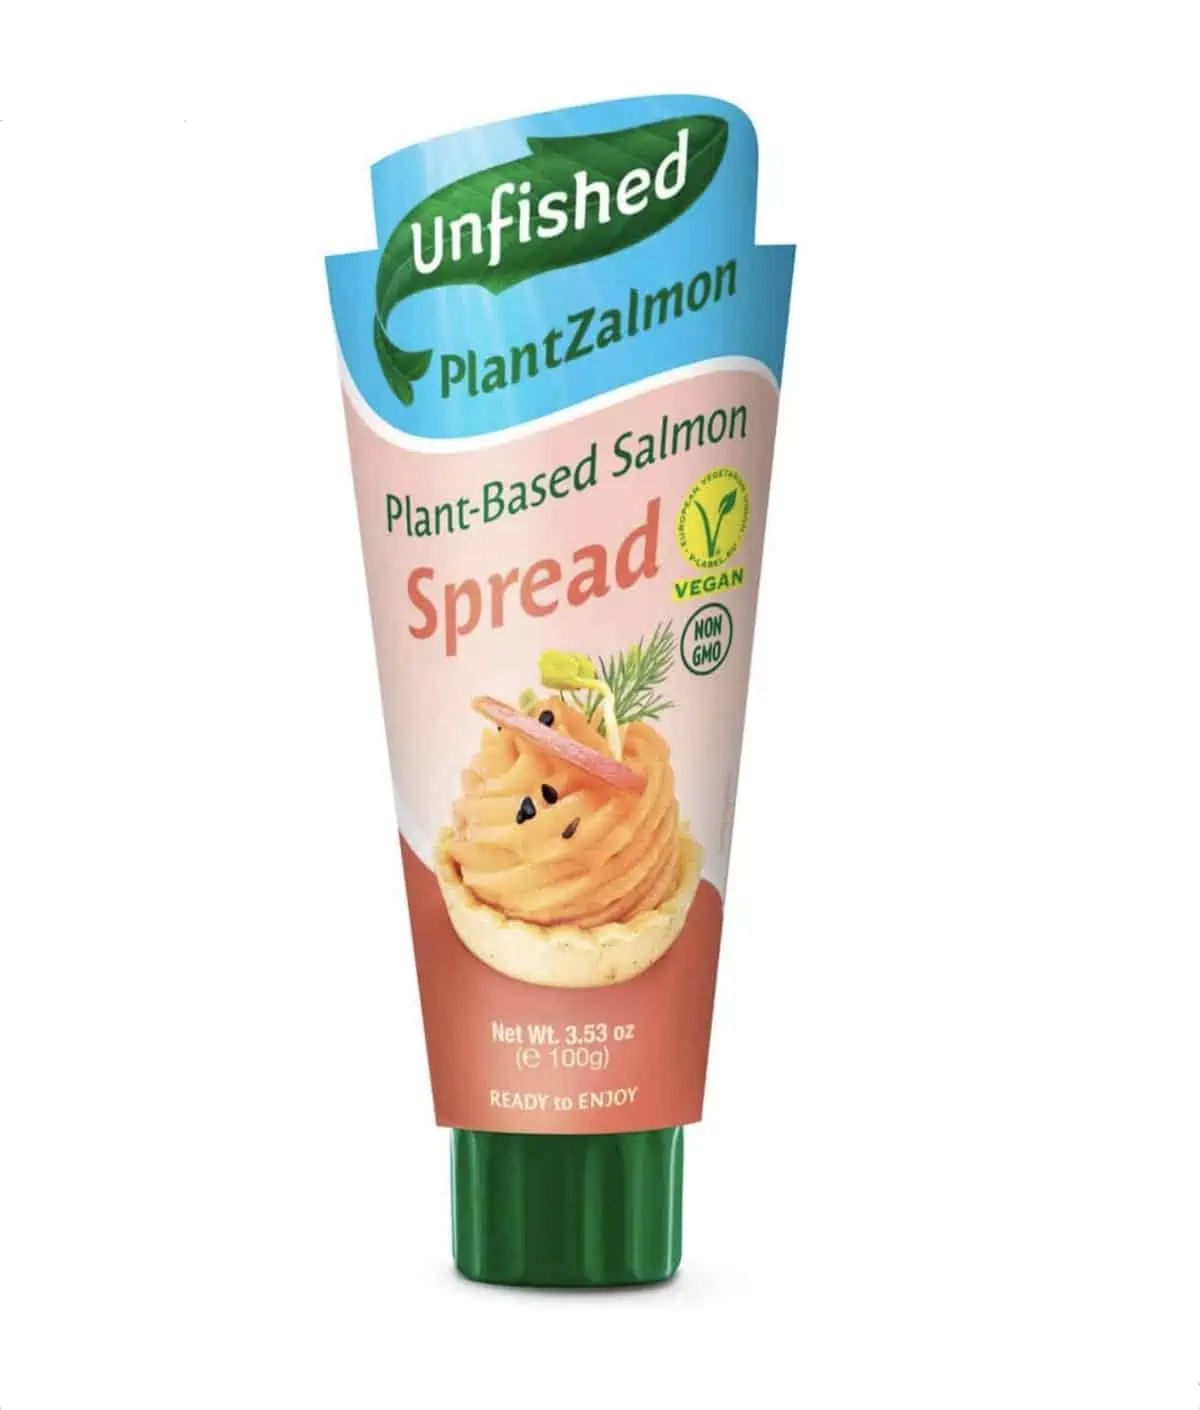 tube of the plant based salmon spread from the brand Unfished